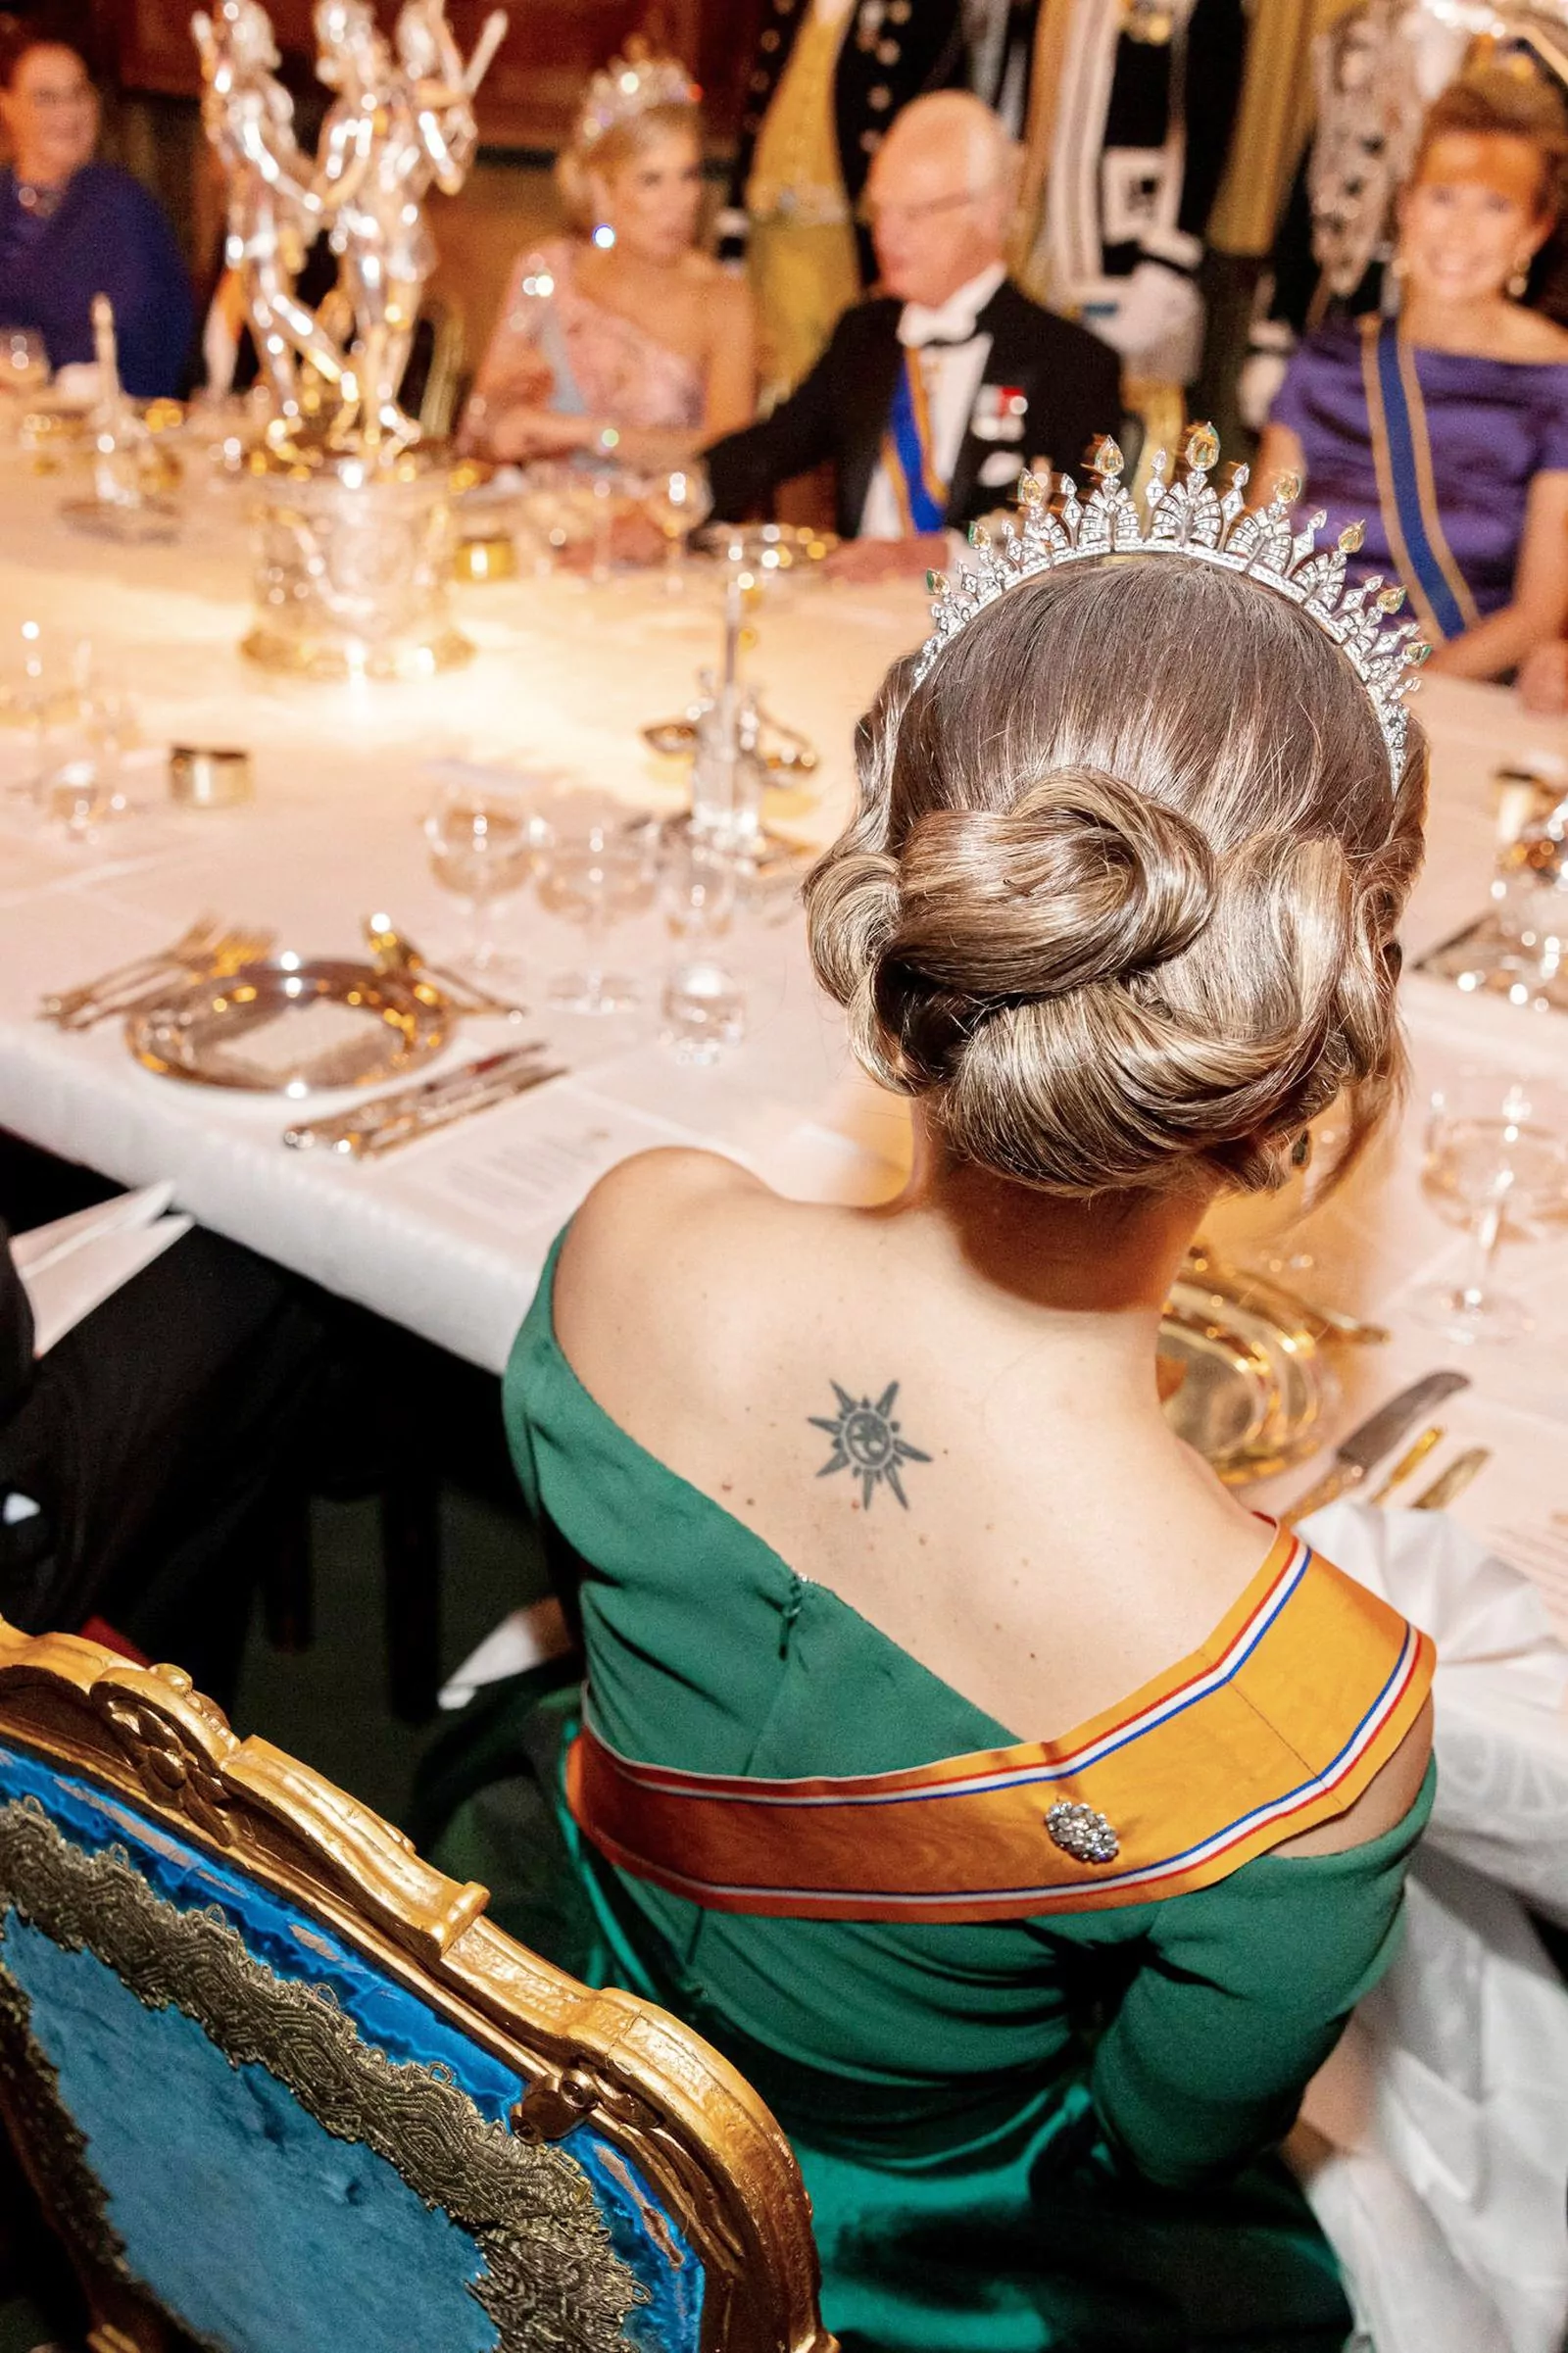 Princess Sofia at the state banquet in honor of King Willem-Alexander and Queen Maxima in Stockholm, October 11, 2022.